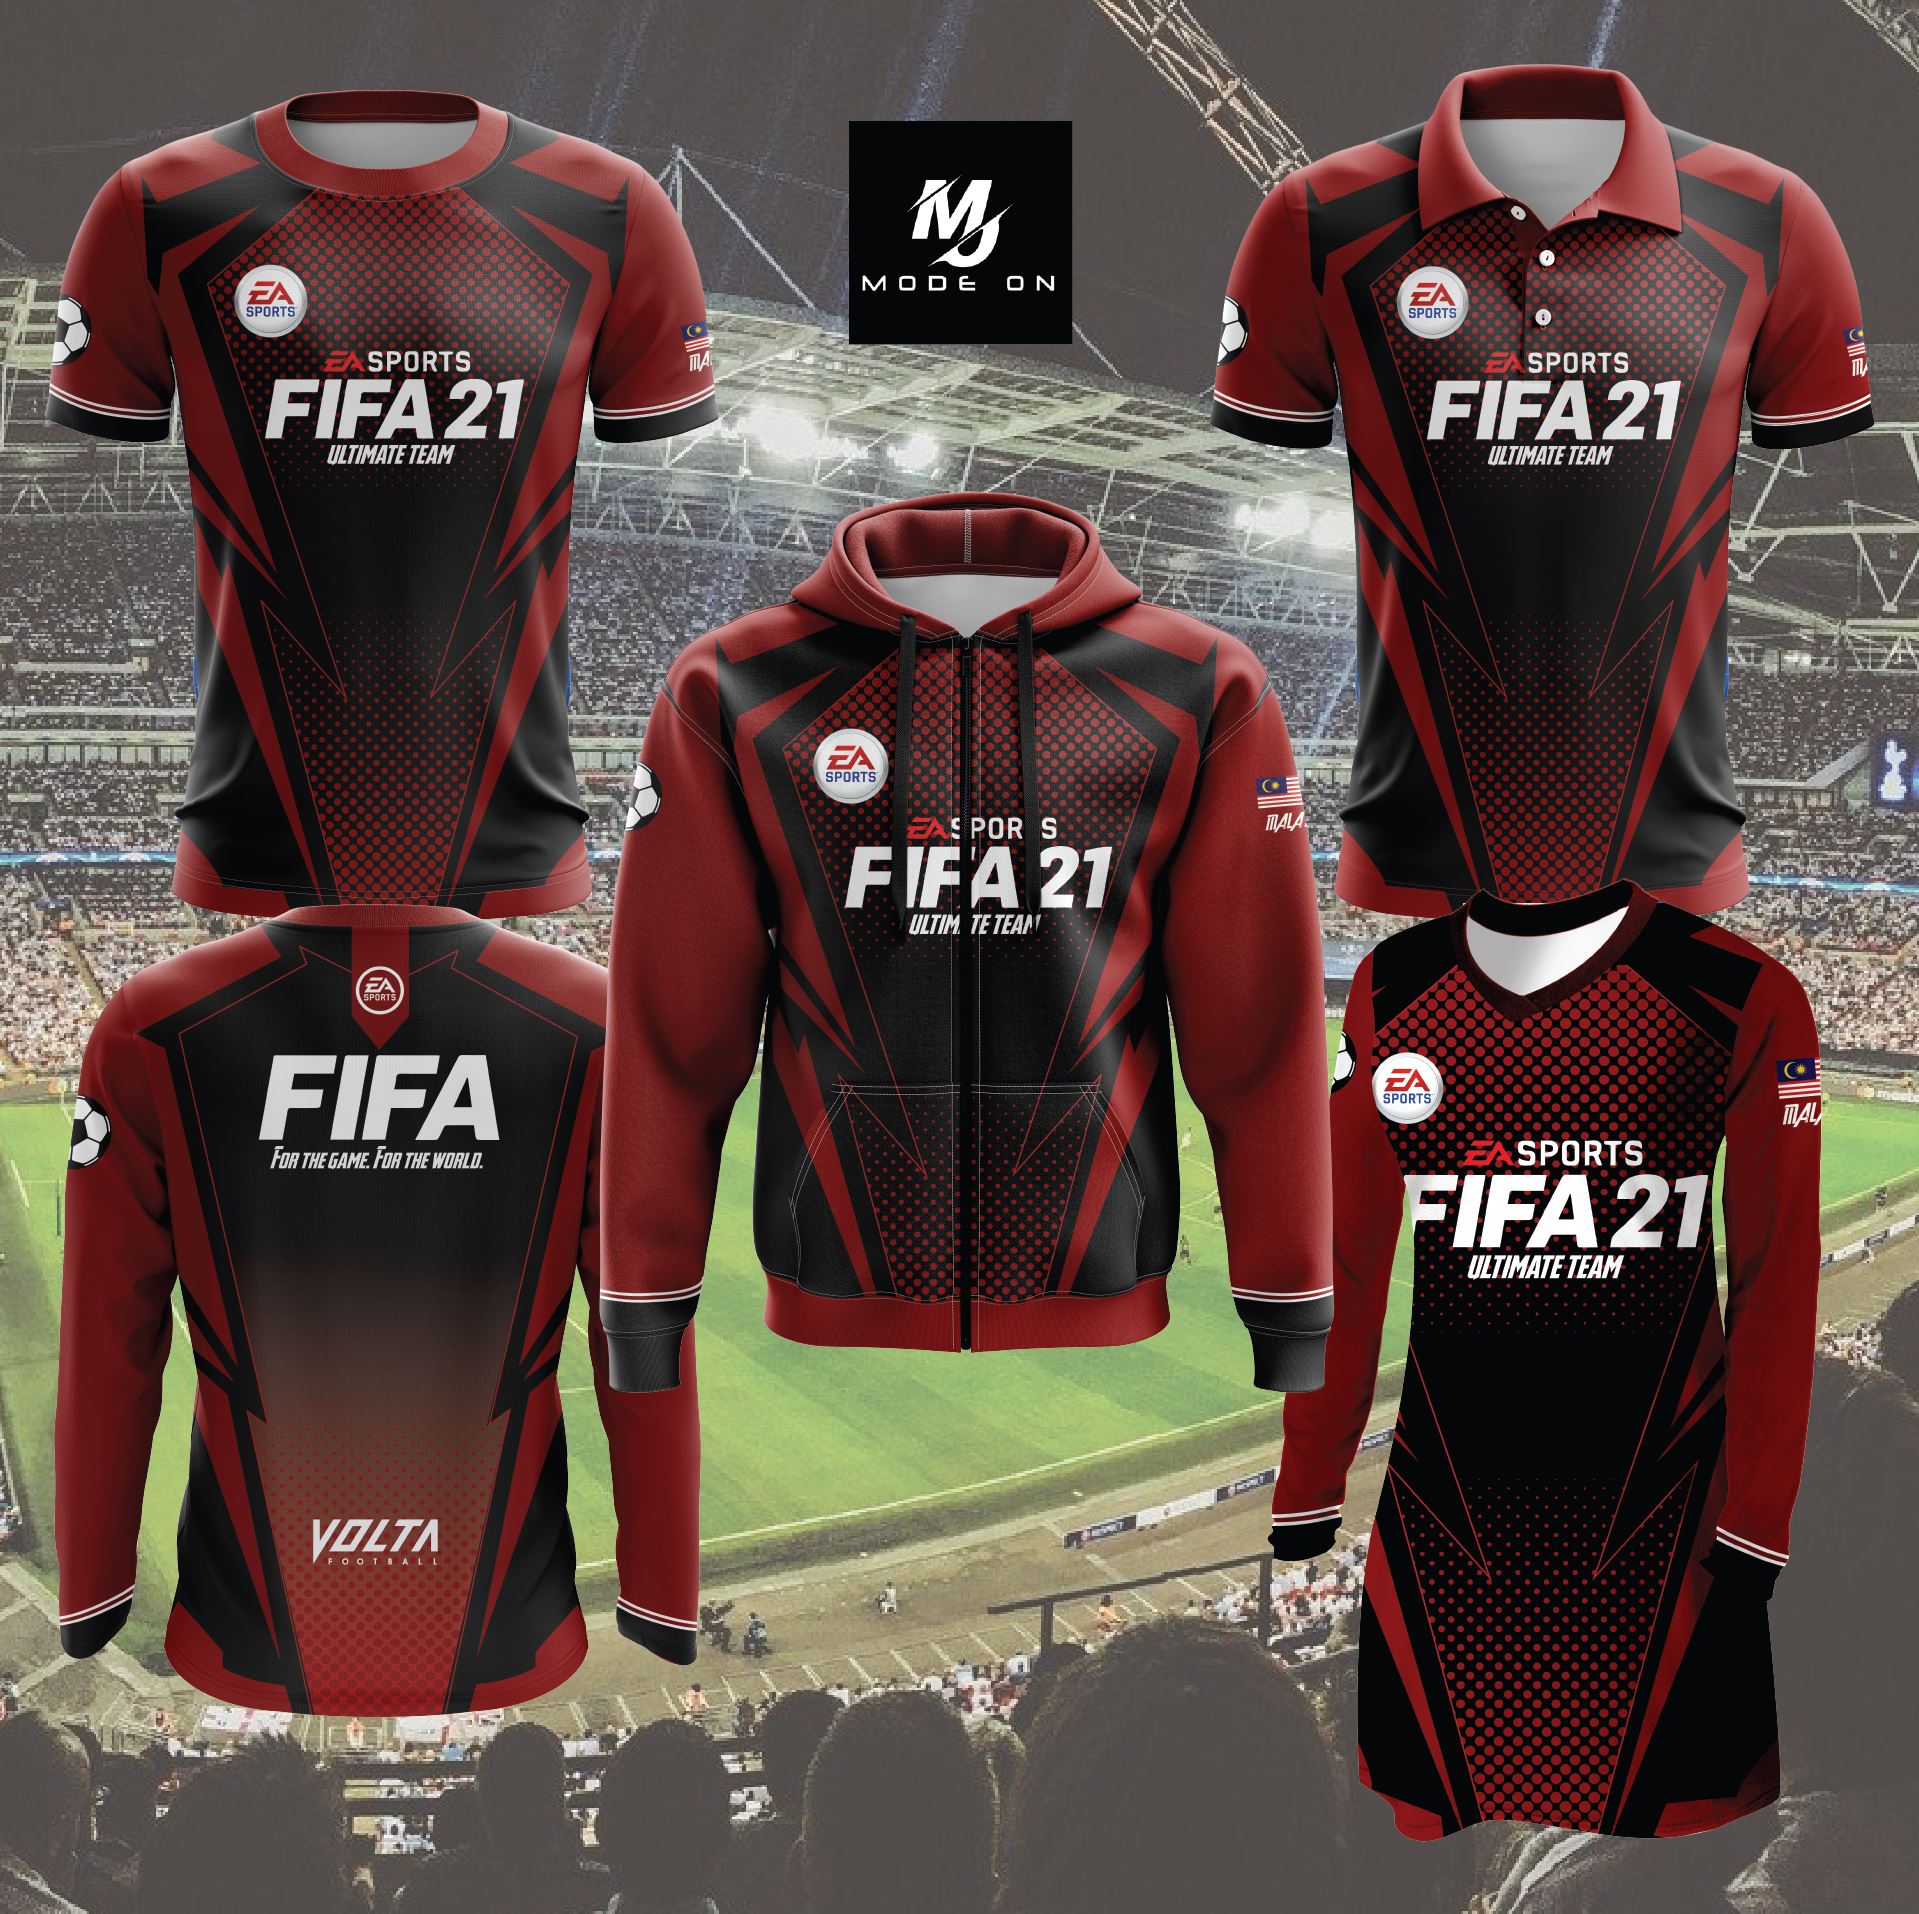 Limited Edition FIFA2021 Jersey and Jacket – Mode On Shop